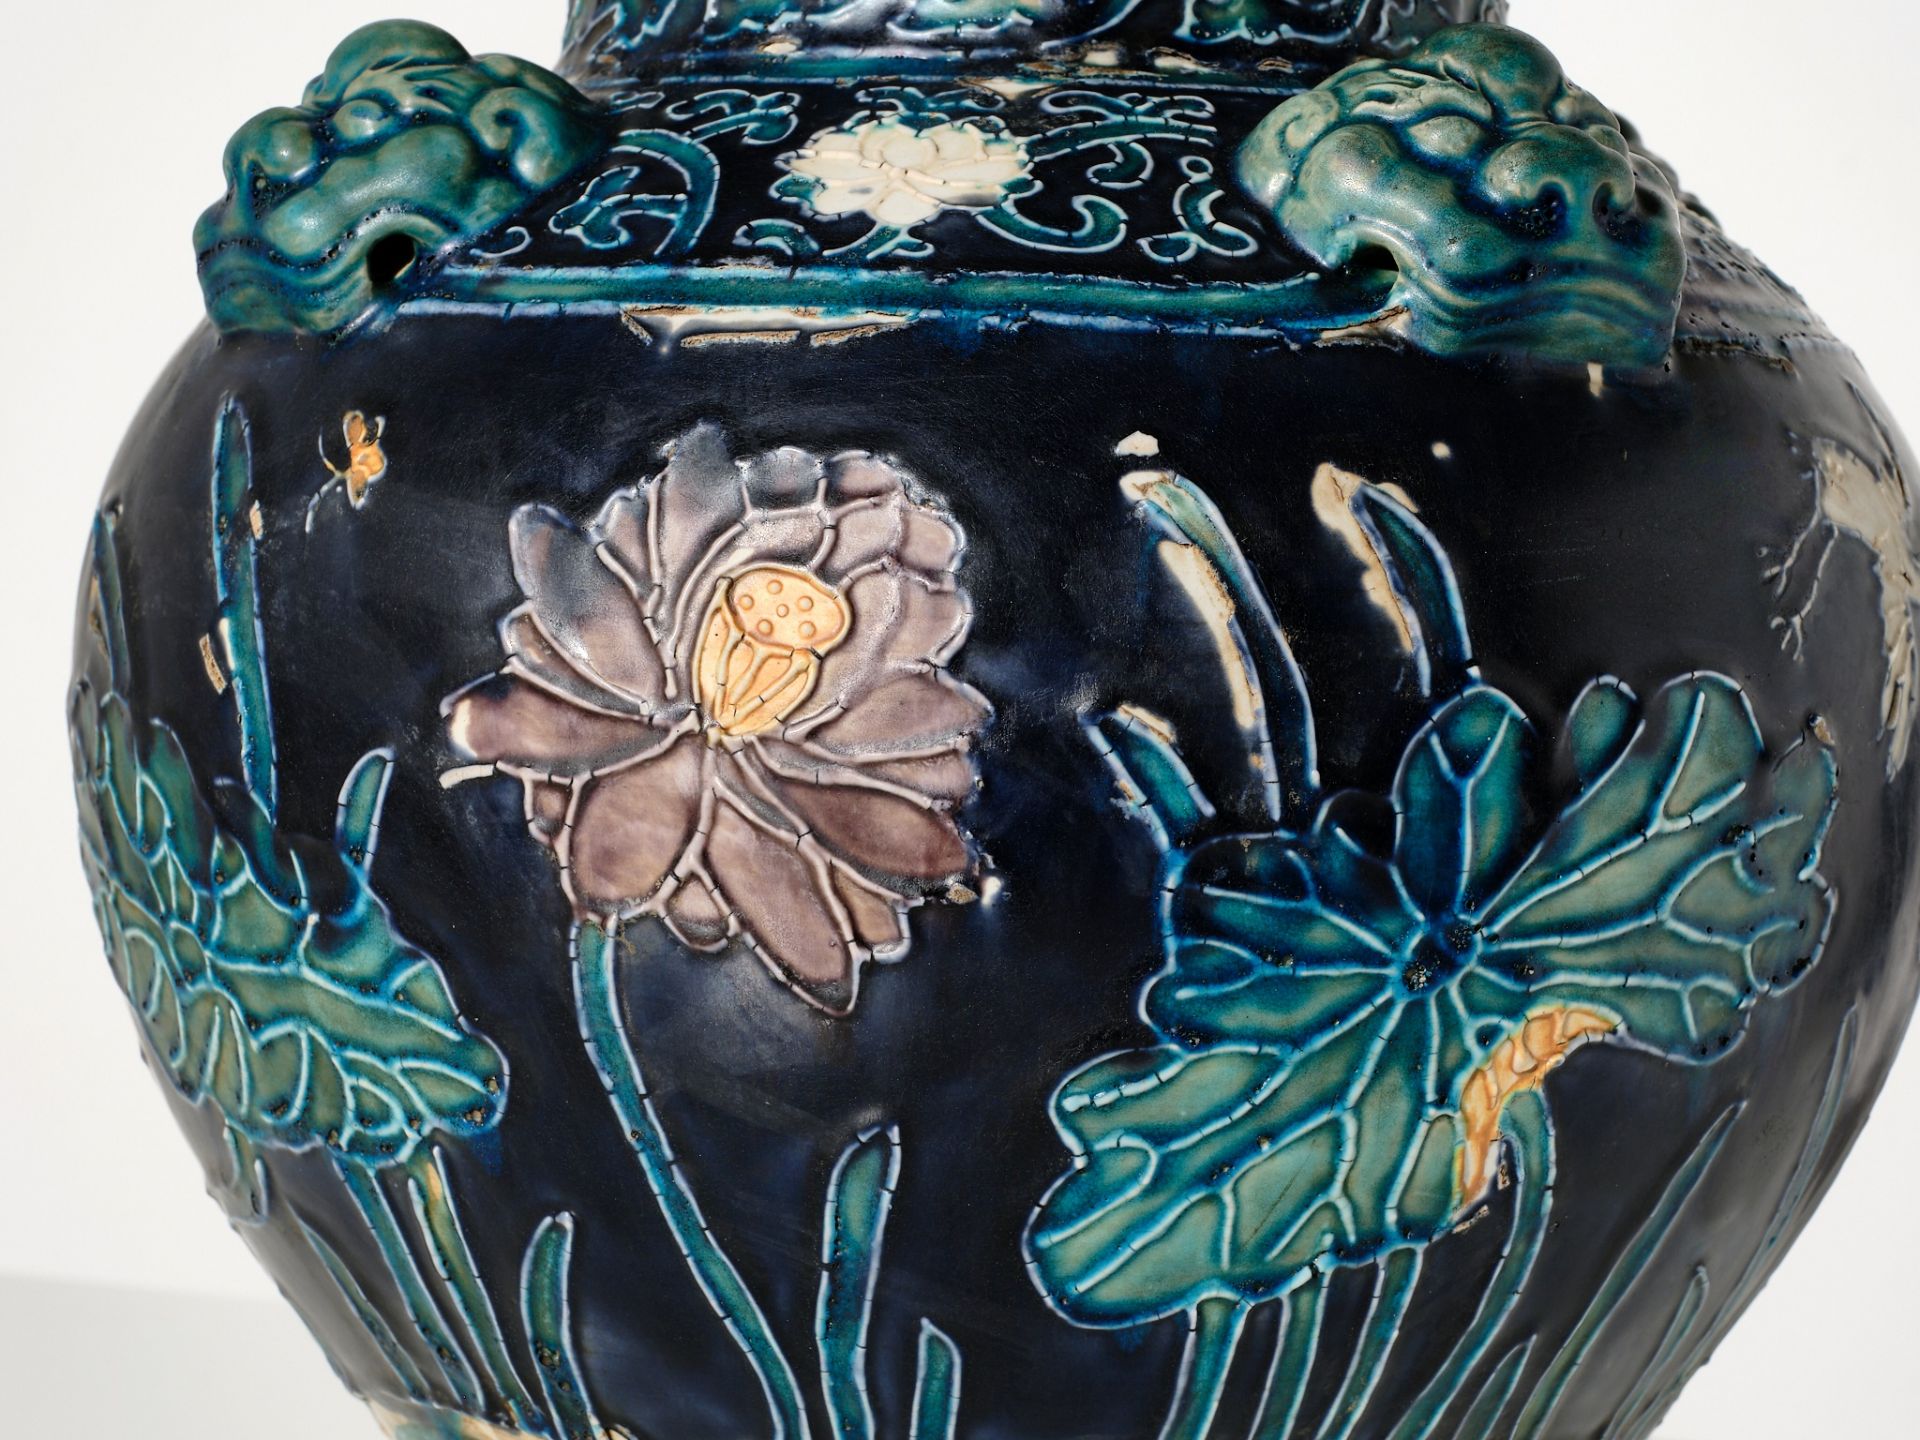 AN EARLY FAHUA-GLAZED 'LOTUS' JAR, GUAN, WITH FOUR LION-MASK HANDLES, MING DYNASTY - Image 8 of 14